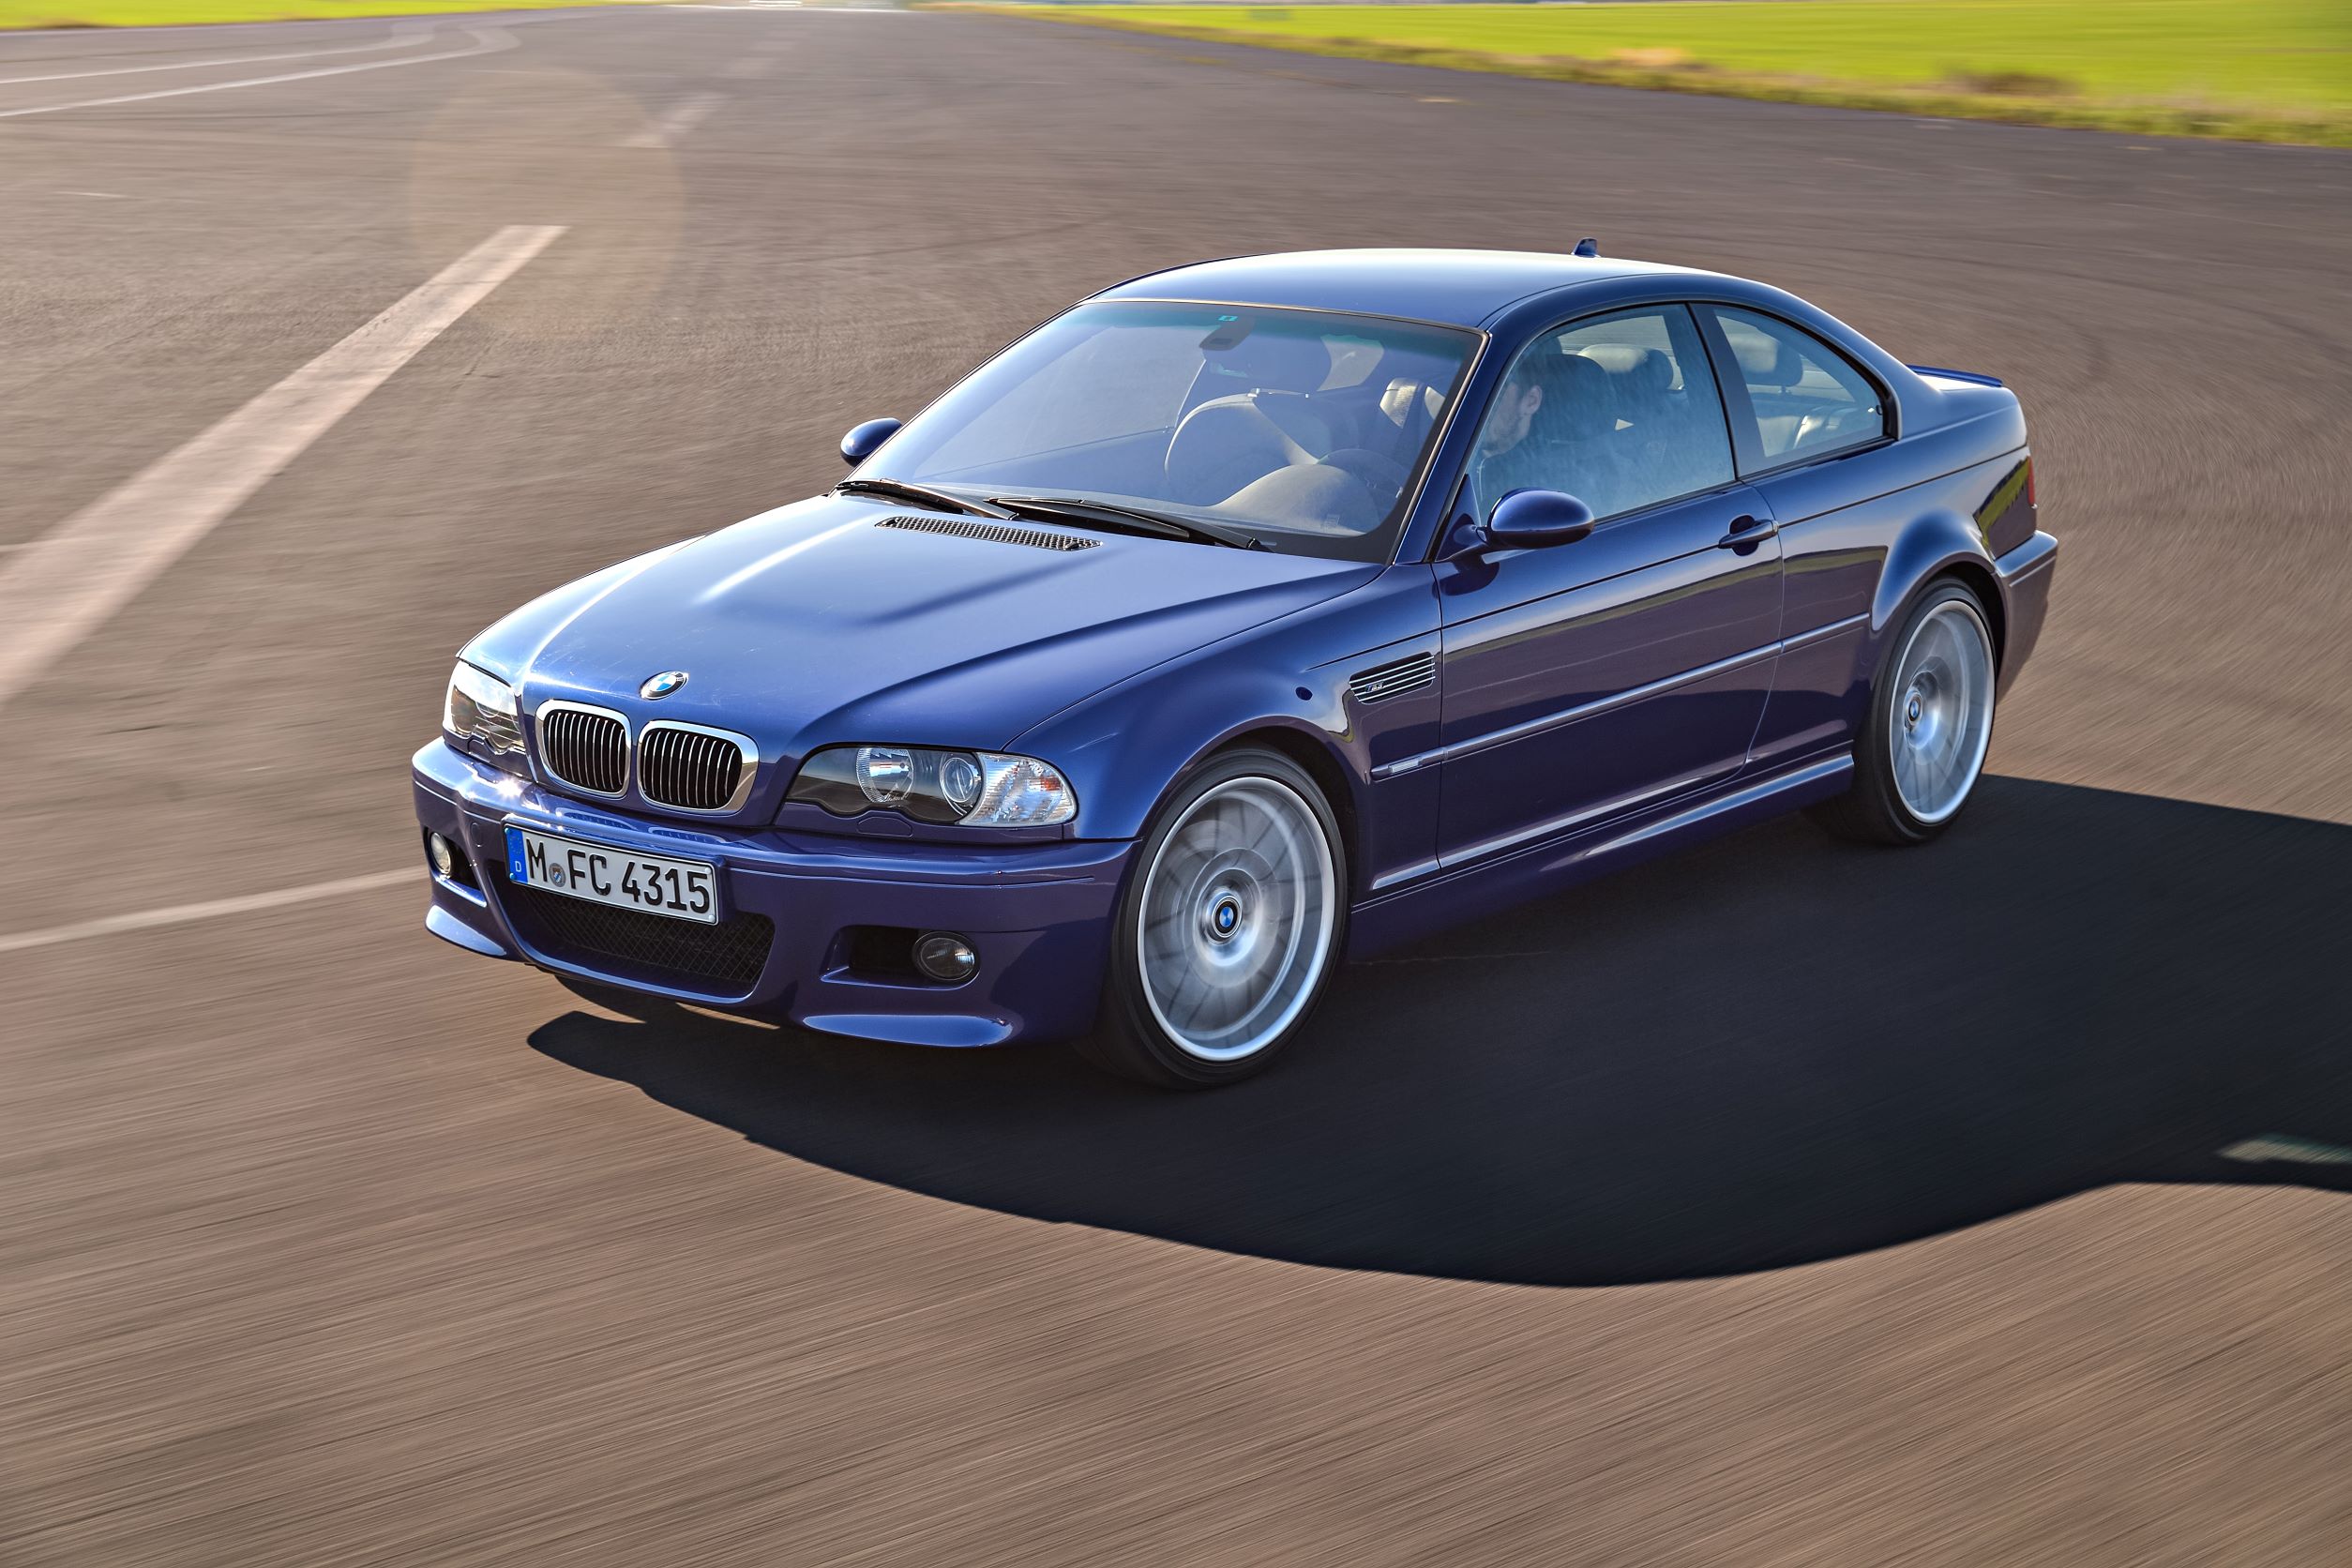 A blue E46 BMW M3 Competition going around a racetrack